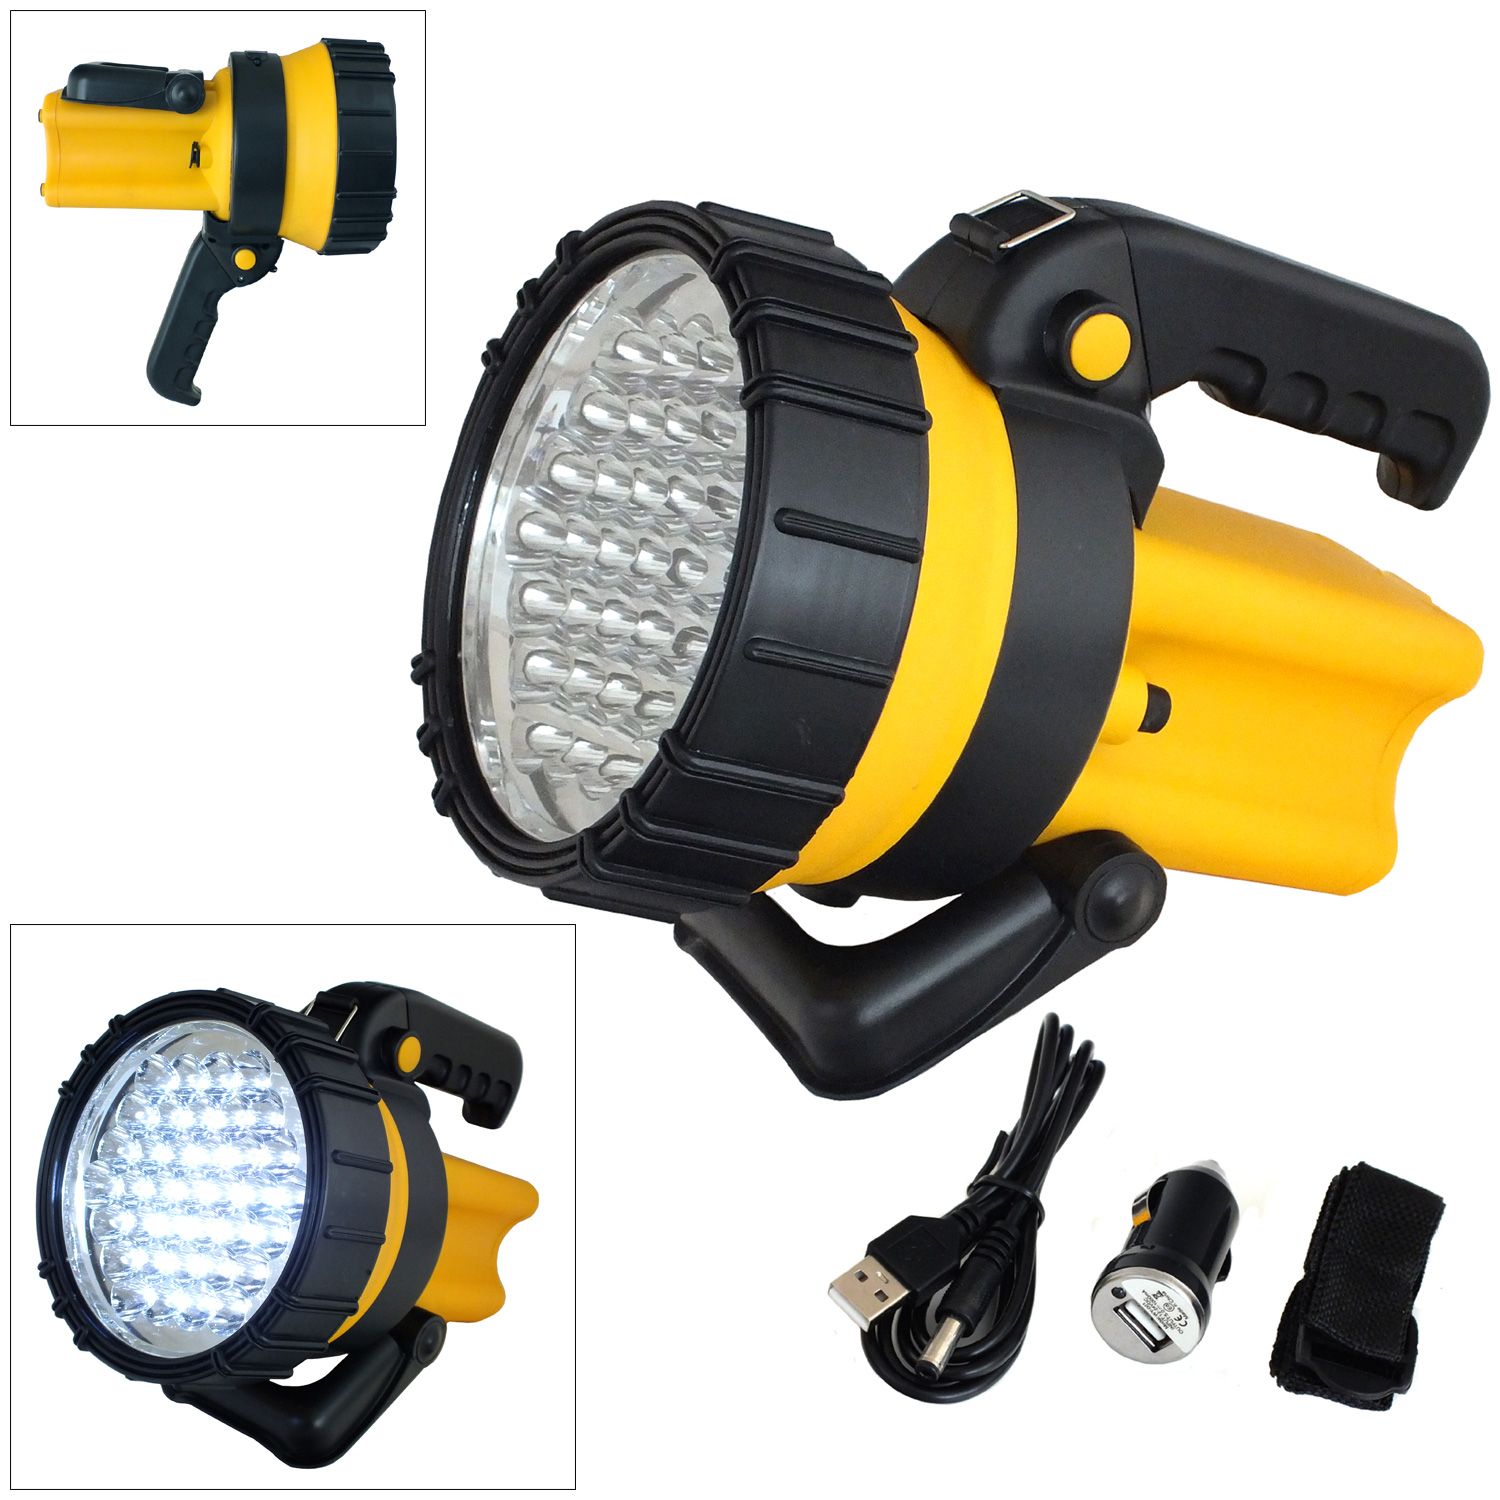 37 Leds Rechargeable Torch Spot lamp Lantern Super White led 4 Hour Use 1 charge 